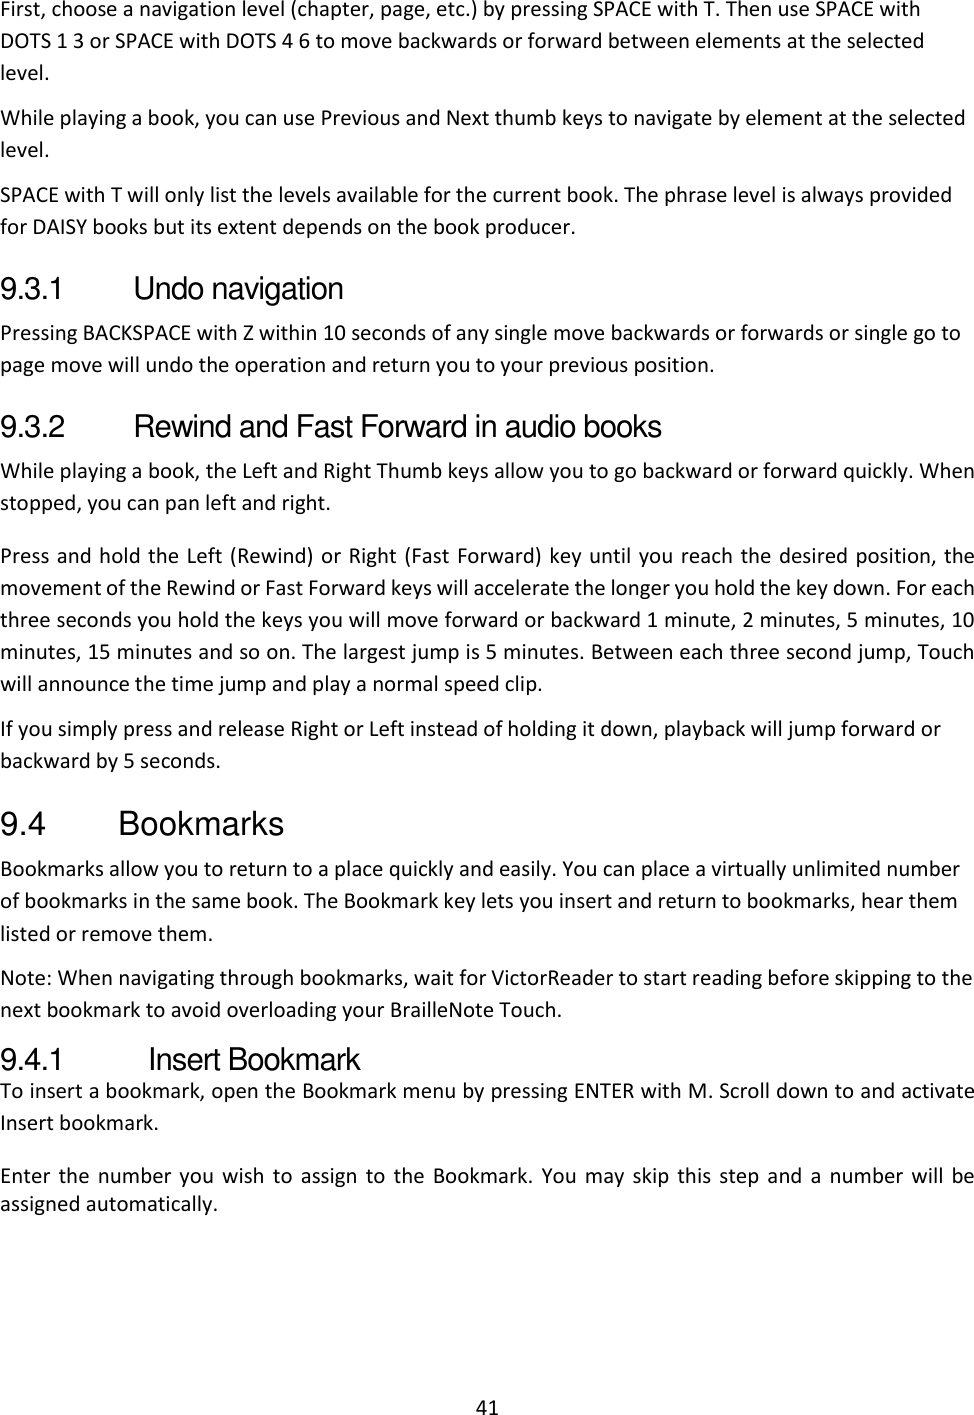 41 First, choose a navigation level (chapter, page, etc.) by pressing SPACE with T. Then use SPACE with DOTS 1 3 or SPACE with DOTS 4 6 to move backwards or forward between elements at the selected level. While playing a book, you can use Previous and Next thumb keys to navigate by element at the selected level. SPACE with T will only list the levels available for the current book. The phrase level is always provided for DAISY books but its extent depends on the book producer. 9.3.1  Undo navigation Pressing BACKSPACE with Z within 10 seconds of any single move backwards or forwards or single go to page move will undo the operation and return you to your previous position. 9.3.2  Rewind and Fast Forward in audio books While playing a book, the Left and Right Thumb keys allow you to go backward or forward quickly. When stopped, you can pan left and right. Press and hold the Left (Rewind) or Right (Fast Forward) key until you reach the desired position, the movement of the Rewind or Fast Forward keys will accelerate the longer you hold the key down. For each three seconds you hold the keys you will move forward or backward 1 minute, 2 minutes, 5 minutes, 10 minutes, 15 minutes and so on. The largest jump is 5 minutes. Between each three second jump, Touch will announce the time jump and play a normal speed clip.  If you simply press and release Right or Left instead of holding it down, playback will jump forward or backward by 5 seconds. 9.4  Bookmarks Bookmarks allow you to return to a place quickly and easily. You can place a virtually unlimited number of bookmarks in the same book. The Bookmark key lets you insert and return to bookmarks, hear them listed or remove them. Note: When navigating through bookmarks, wait for VictorReader to start reading before skipping to the next bookmark to avoid overloading your BrailleNote Touch. 9.4.1  Insert Bookmark To insert a bookmark, open the Bookmark menu by pressing ENTER with M. Scroll down to and activate Insert bookmark. Enter  the  number you  wish  to  assign  to  the  Bookmark.  You may skip  this  step  and  a  number  will be assigned automatically. 